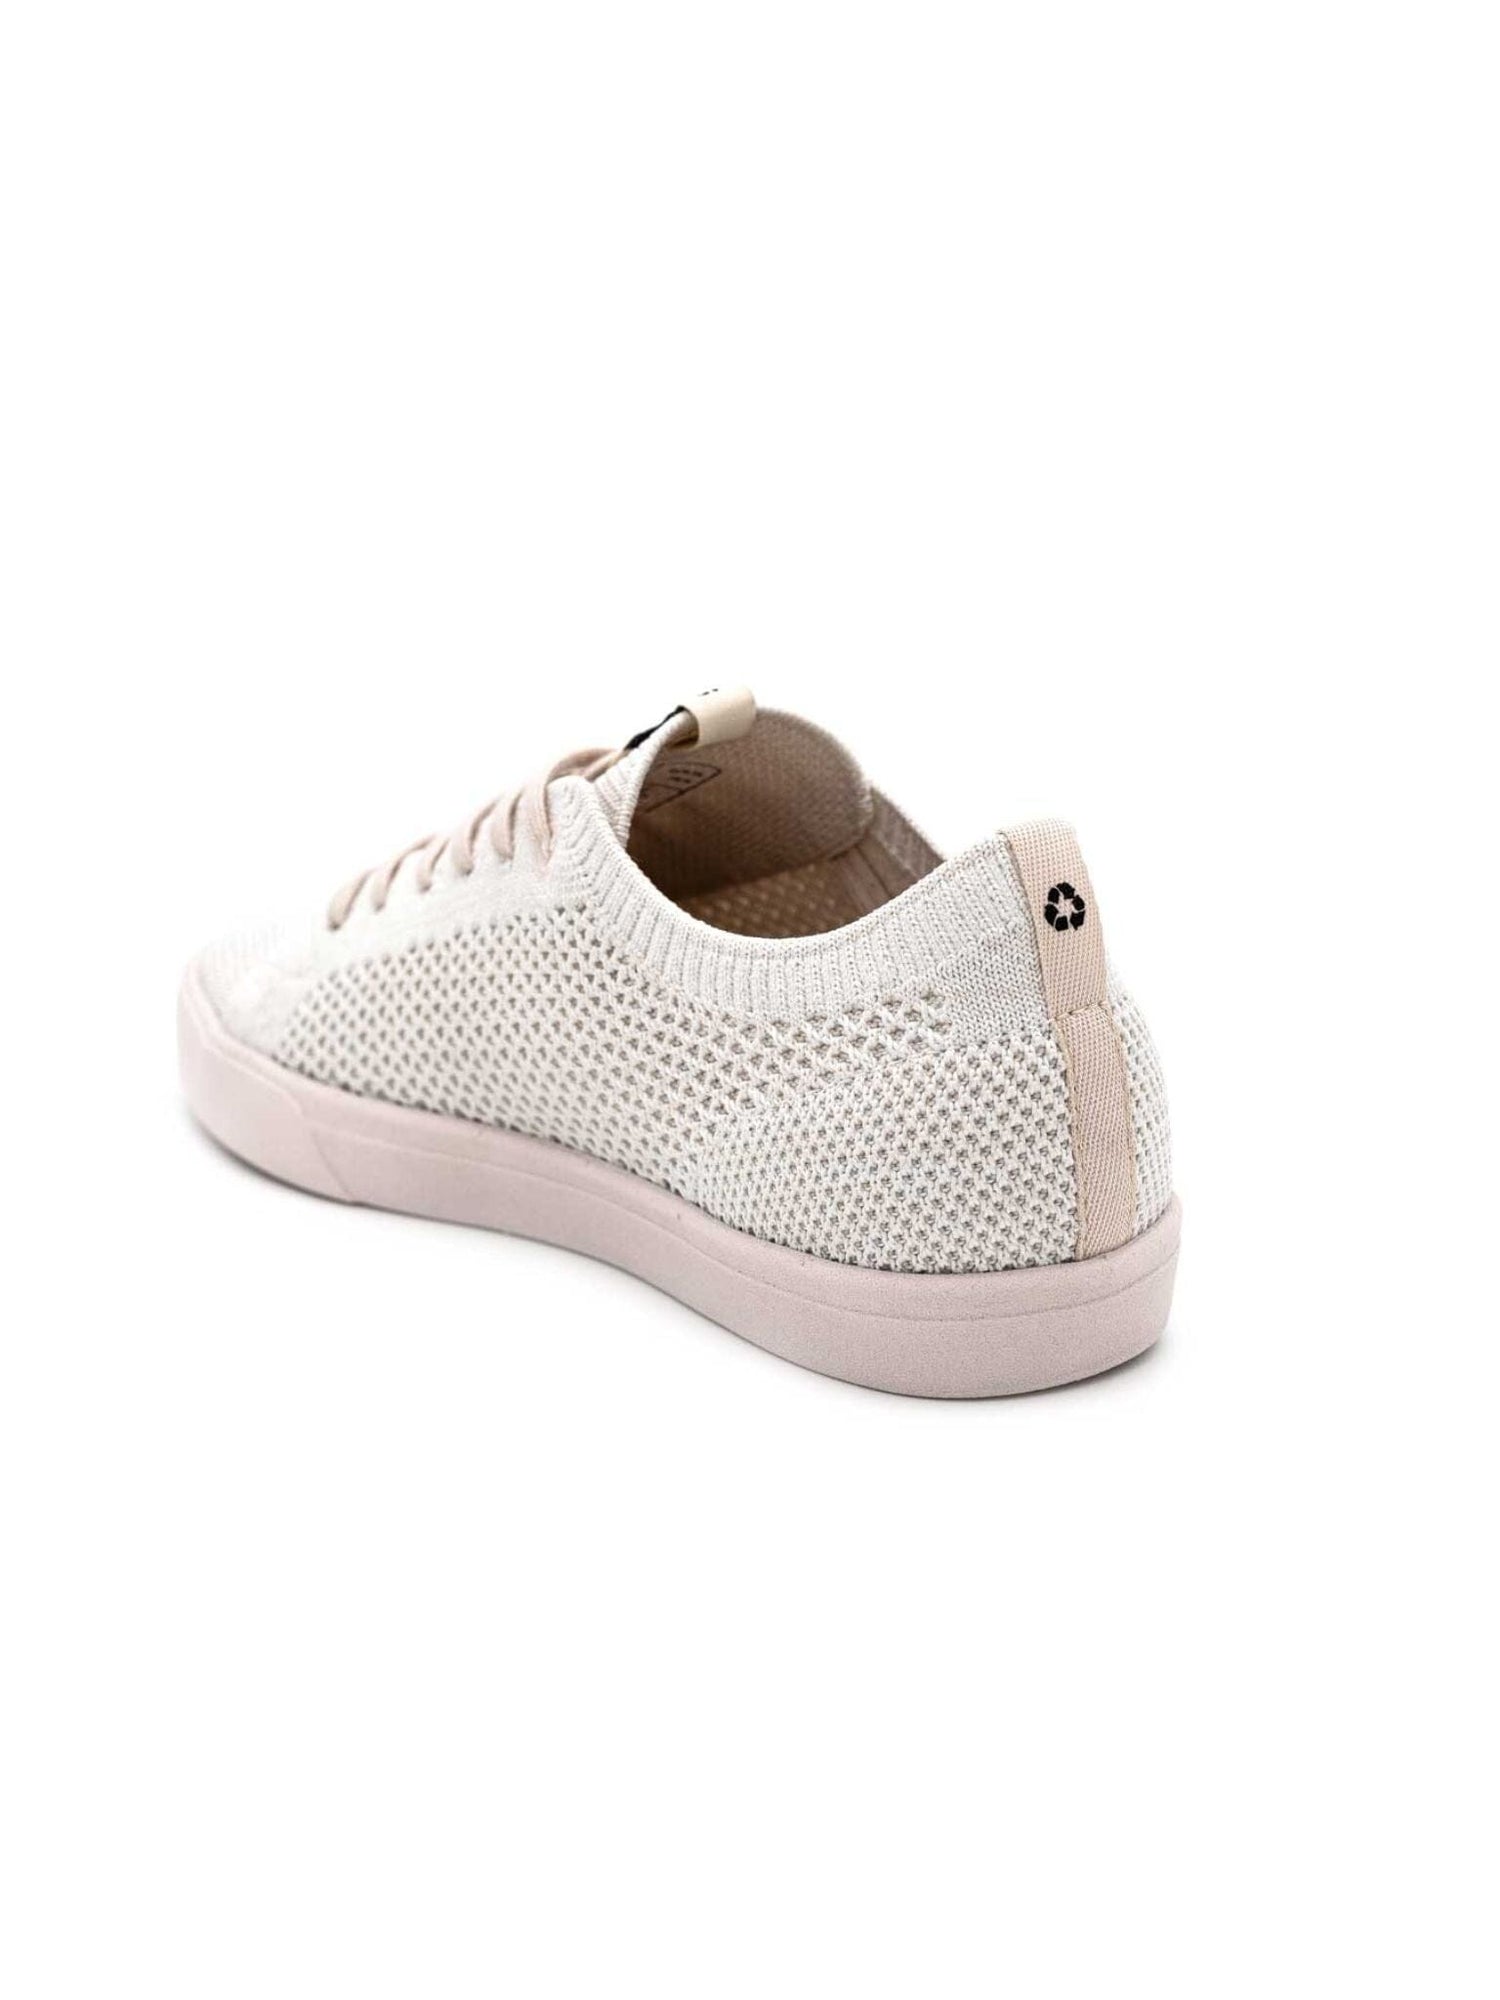 Saola W's Cannon Knit - Recycled PET White 21 Shoes